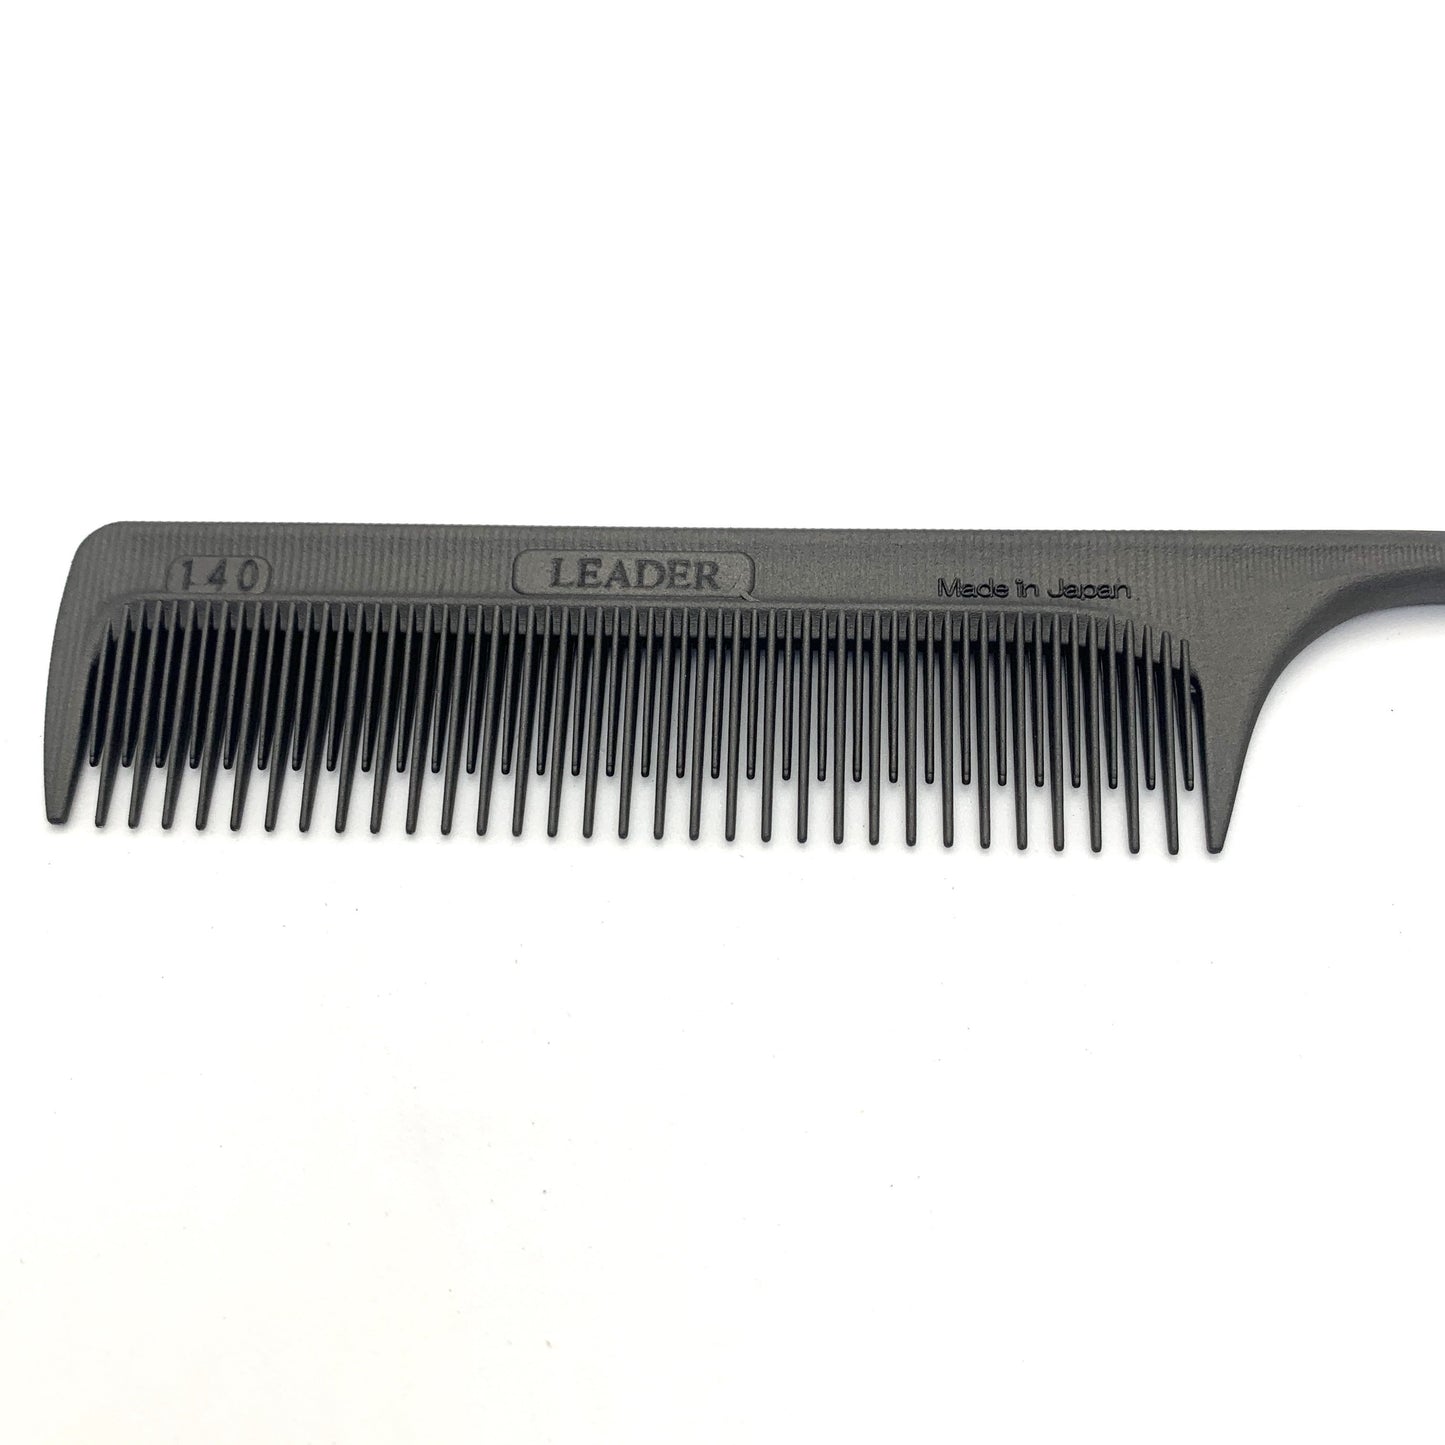 Leader SP 141 Tease/Tailcomb Combs Hairbrained 